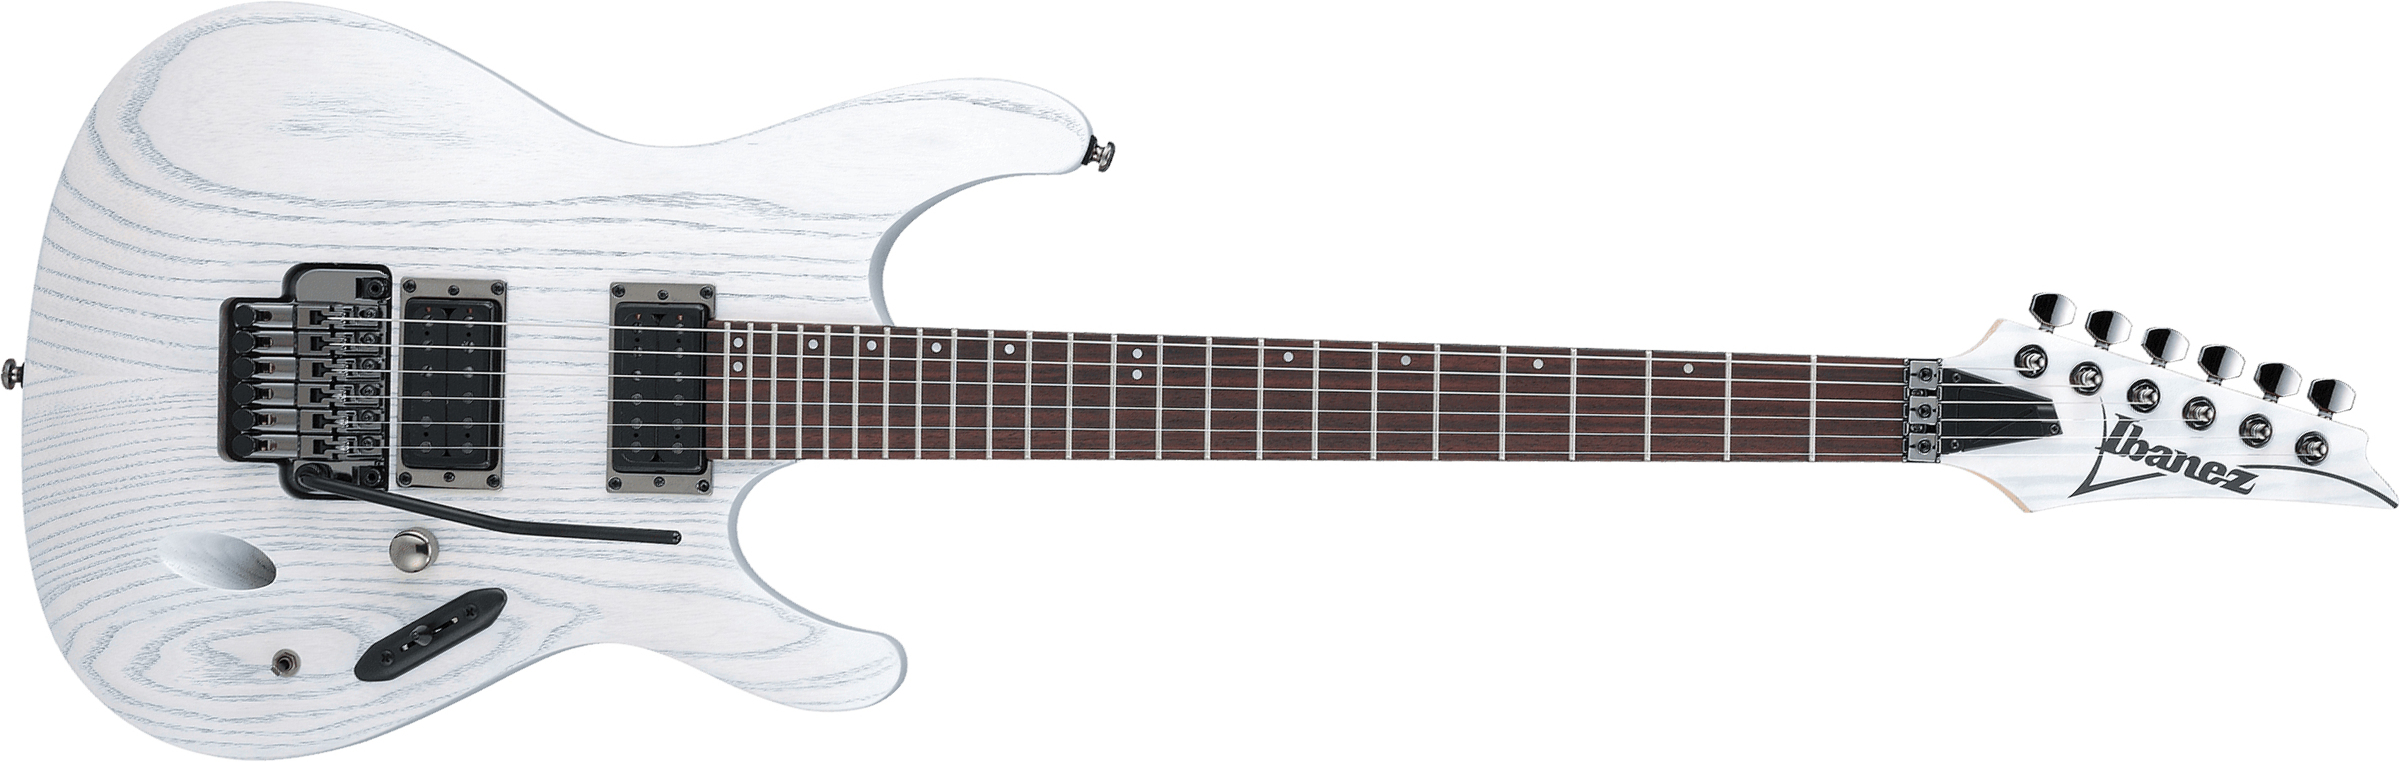 Ibanez Paul Waggoner Pwm20 Signature Hh Fr Rw - White Stain - E-Gitarre in Str-Form - Main picture